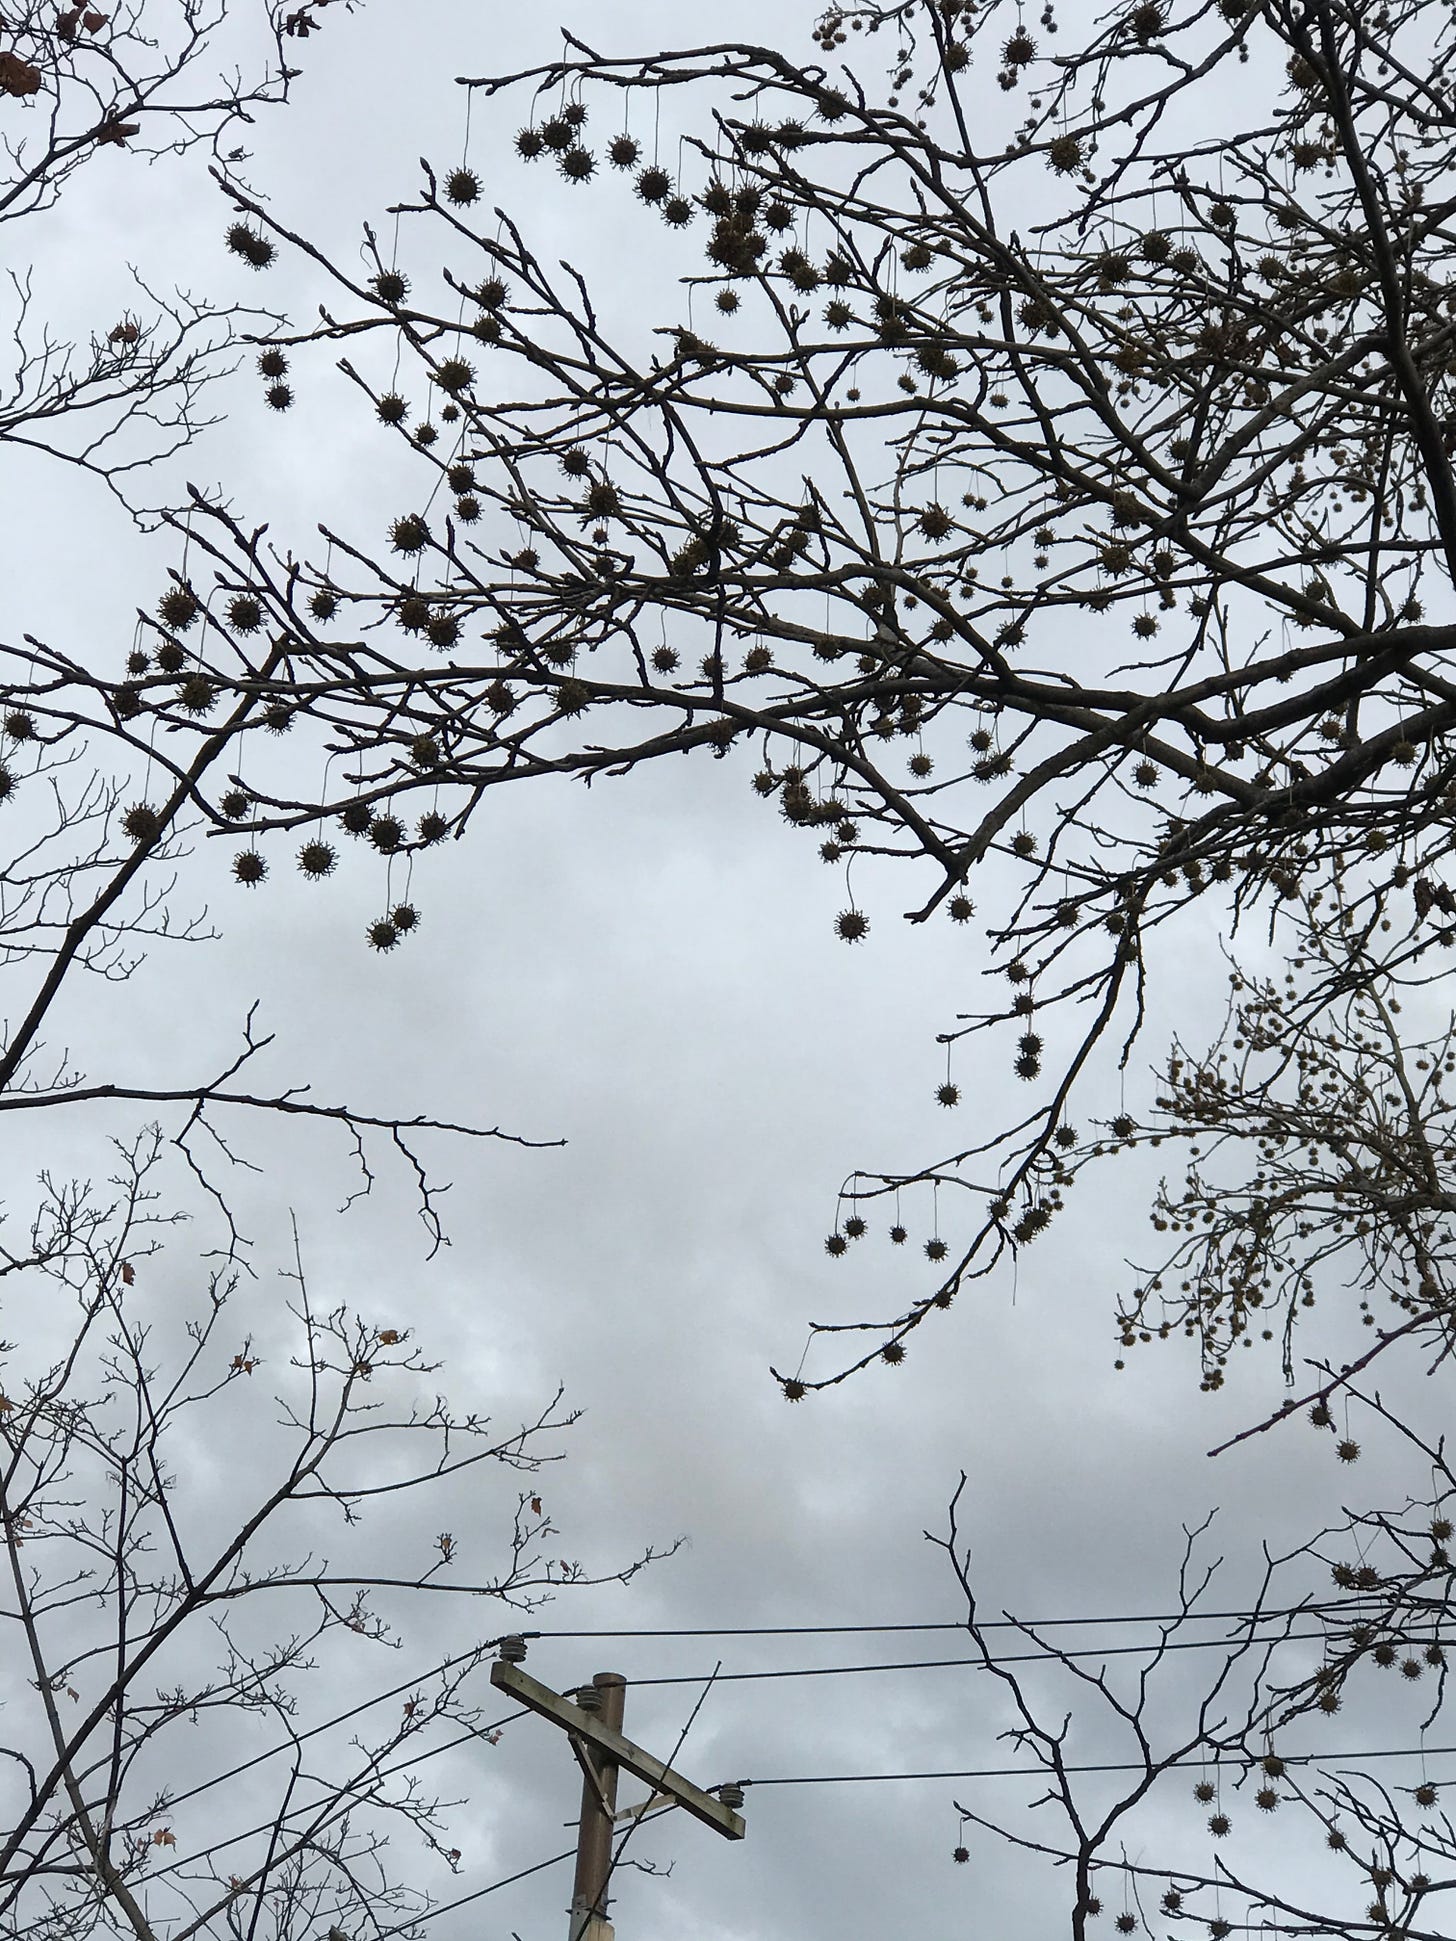 Sweetgum tree branches laden with spikes seedpods against a gray sky